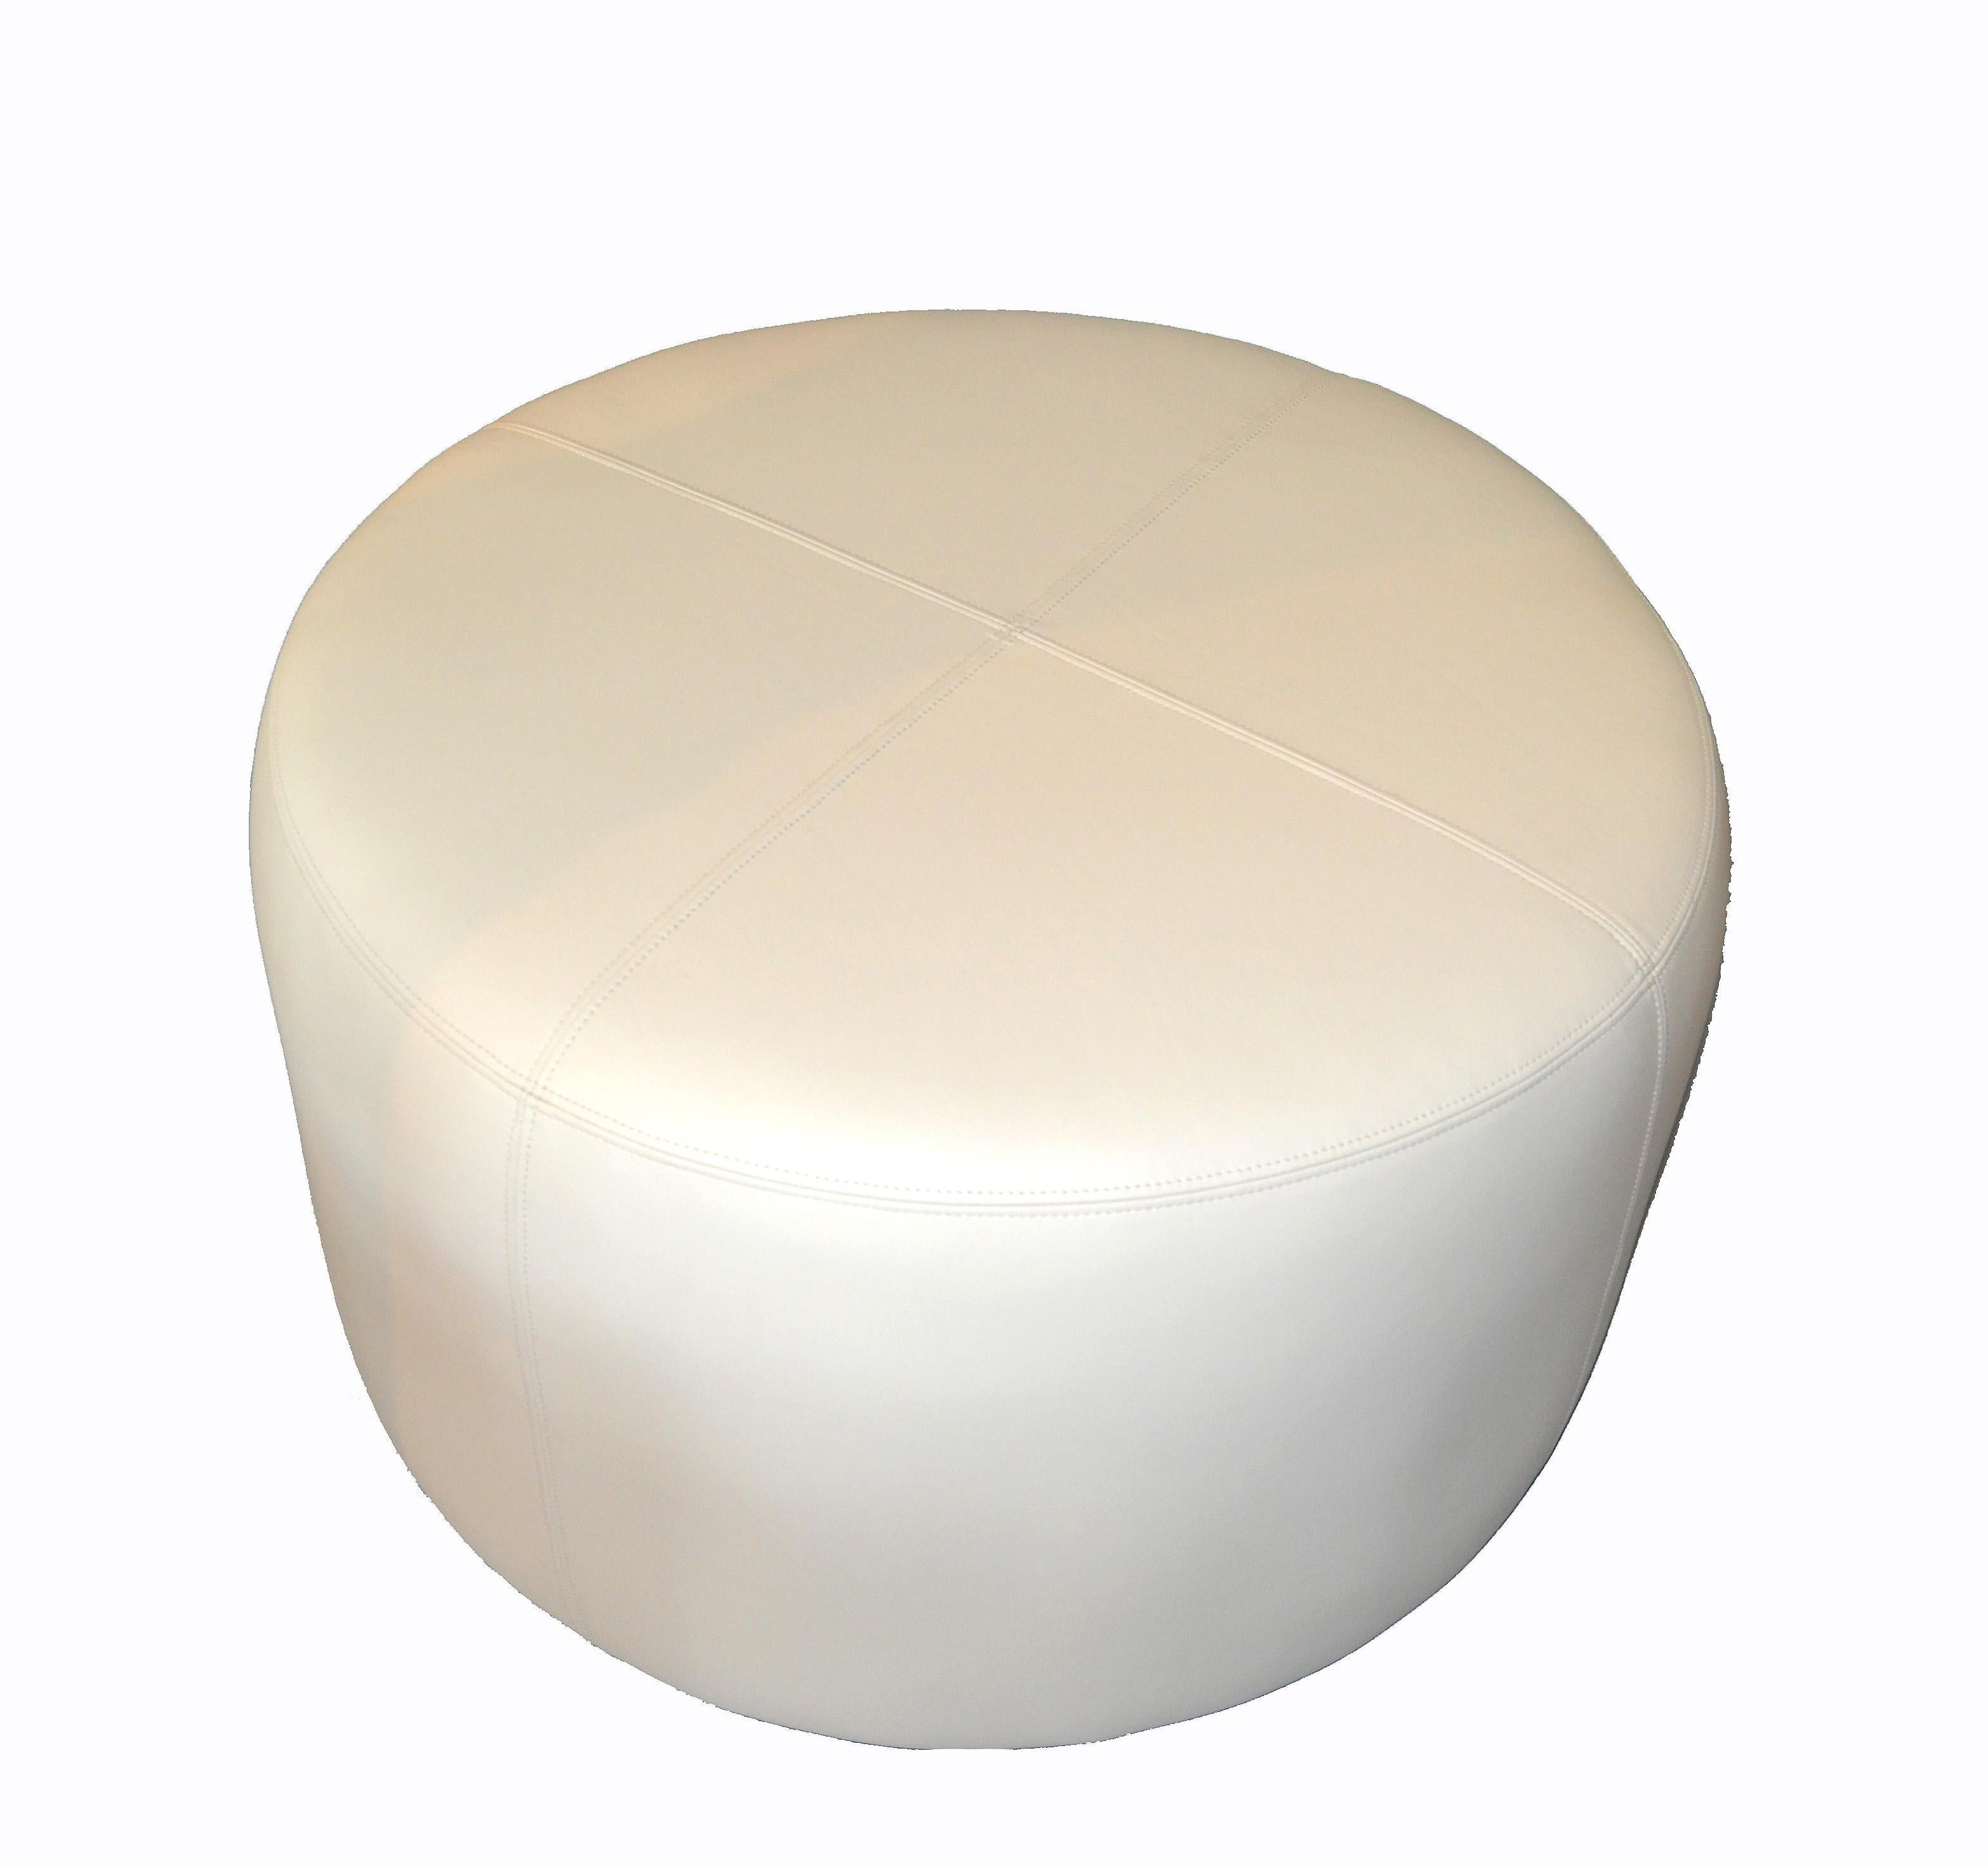 American Modern Round Handcrafted Leather Ottoman, Pouf in Beige Leather, Contemporary